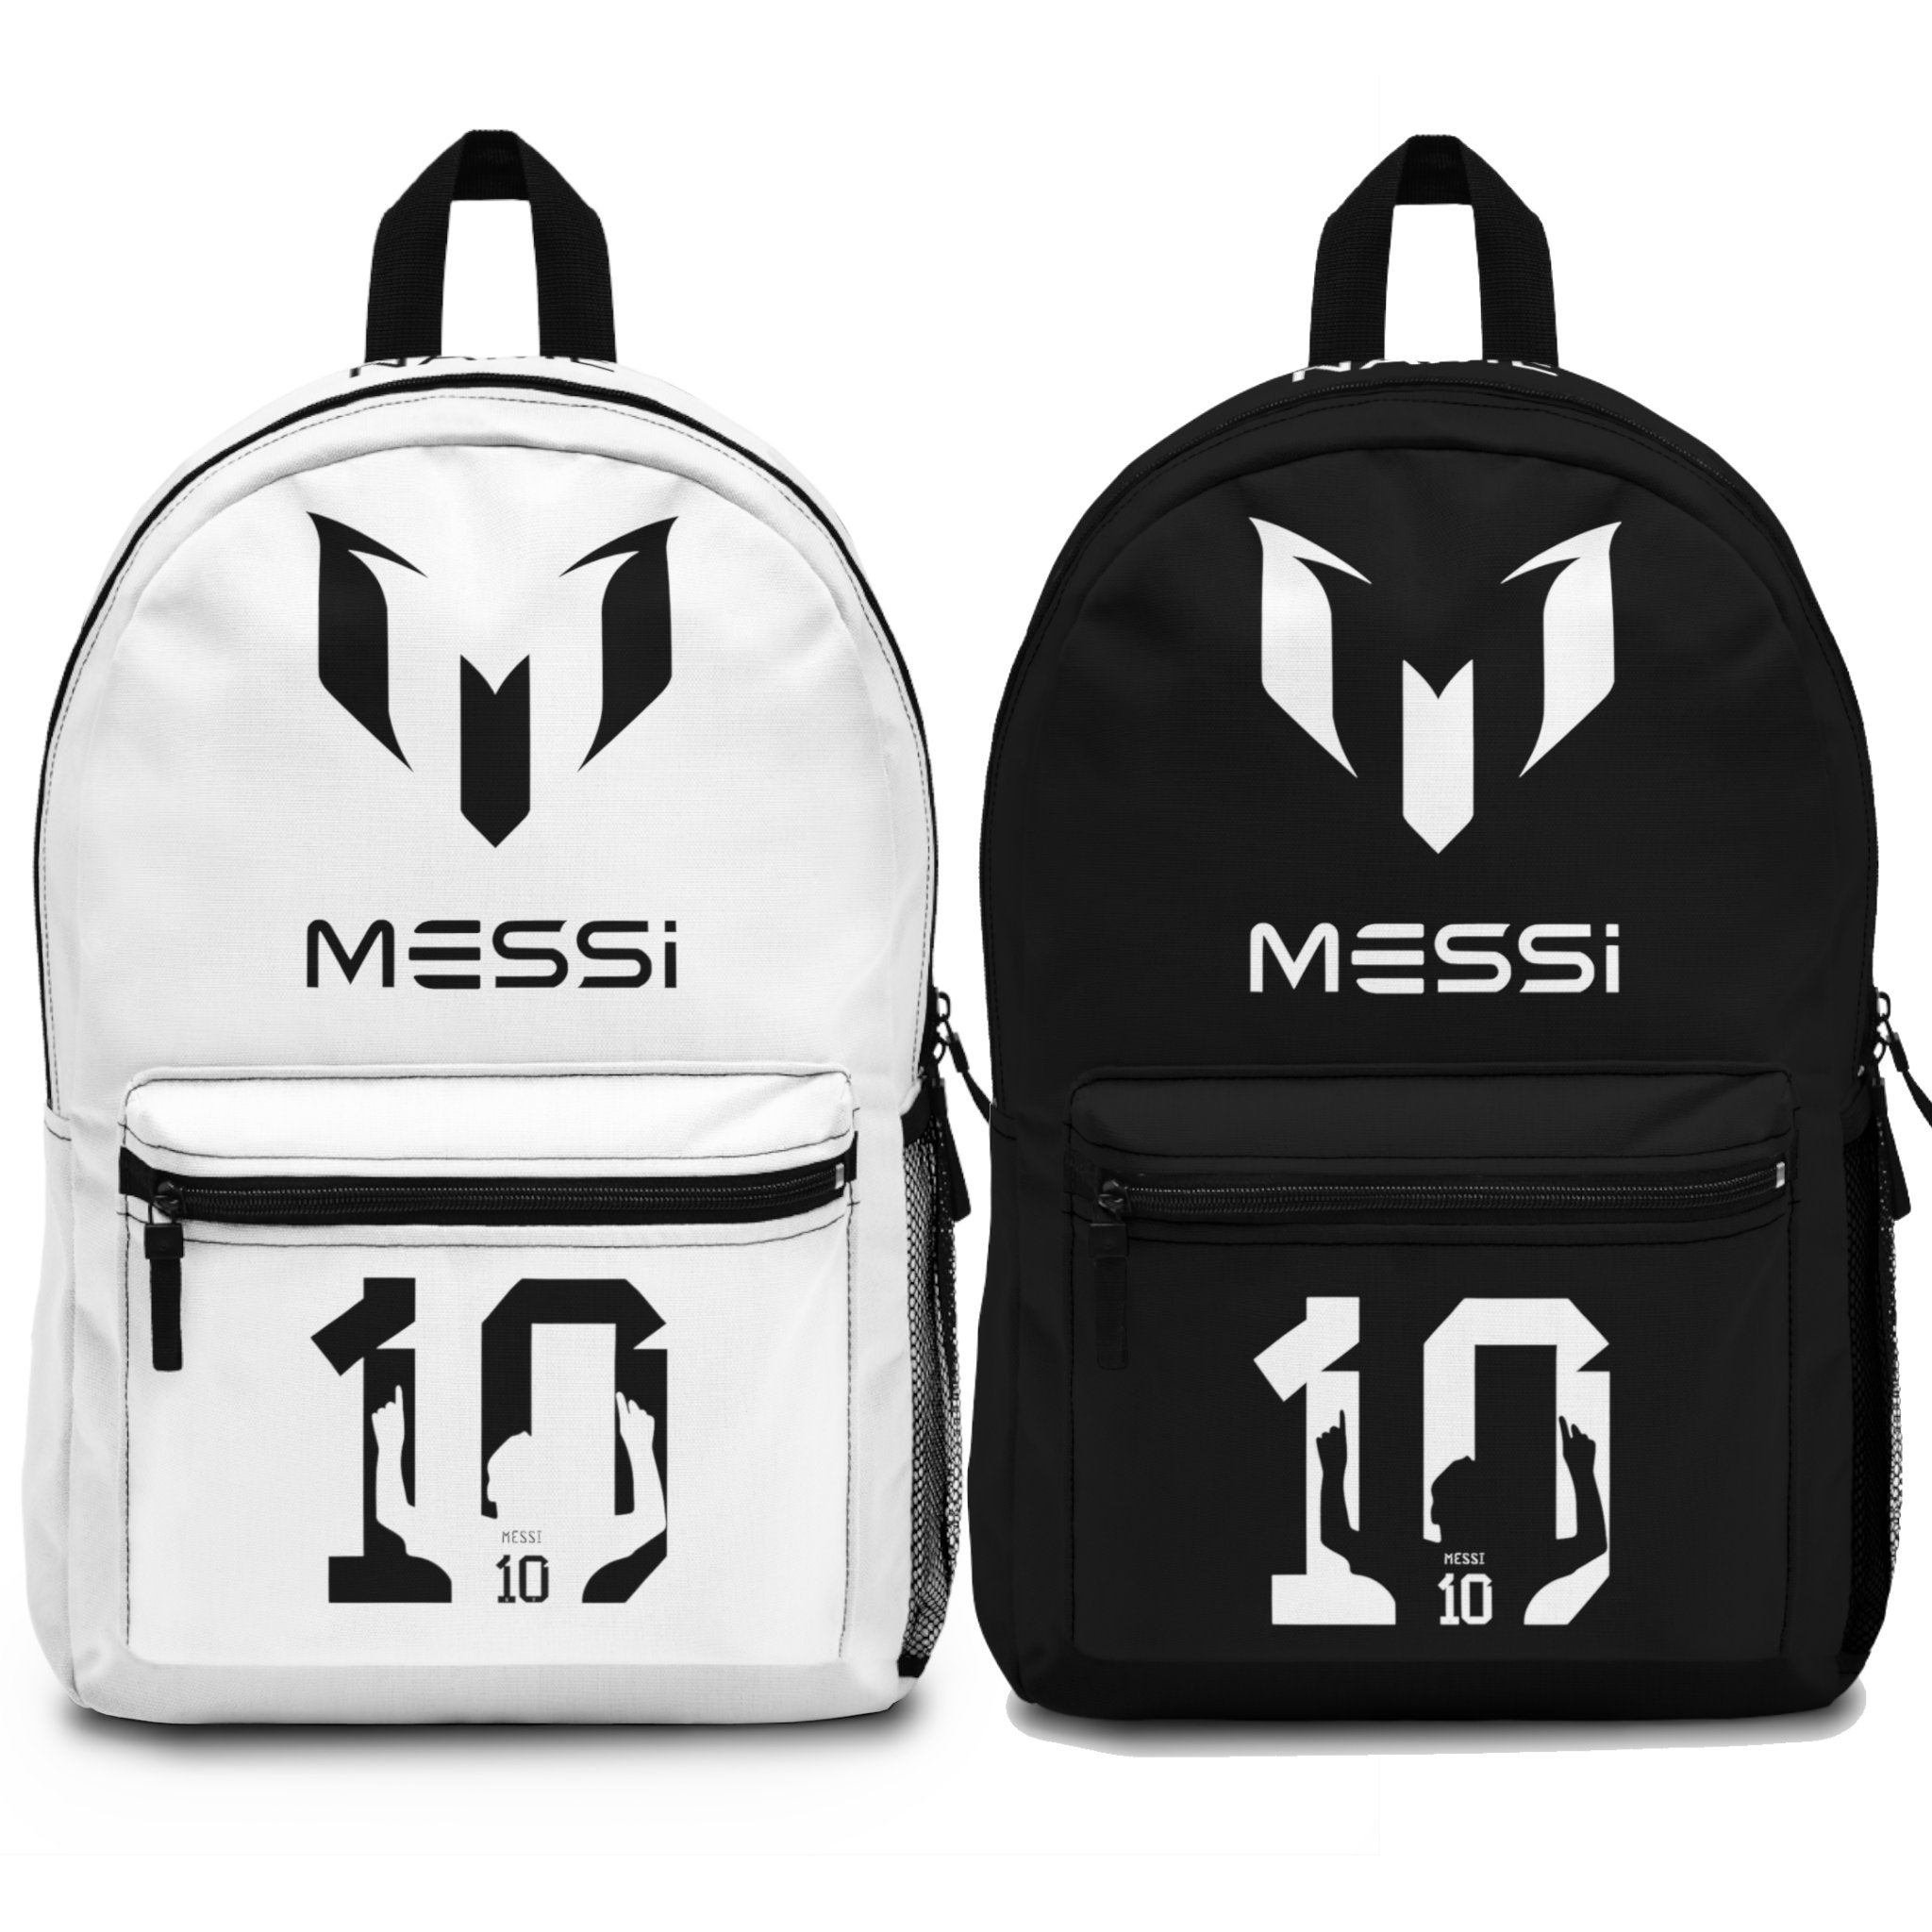 Messi Backpack for School 